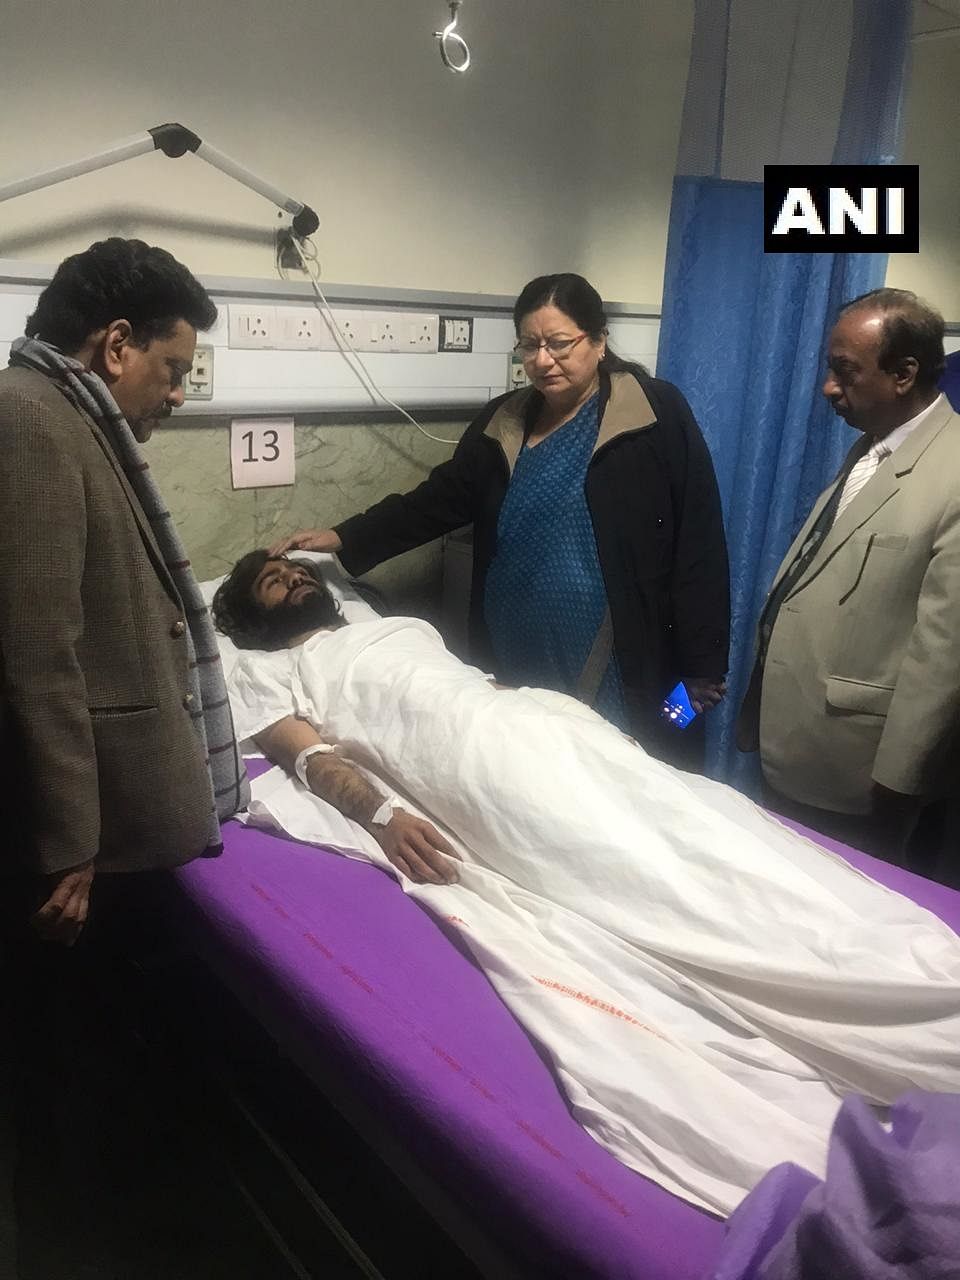 Najma Akhtar, Vice-Chancellor of Jamia Millia Islamia visited All India Institute of Medical Sciences (AIIMS) trauma centre to enquire about the health of Shadab Farooq. Farooq is a student of Jamia Millia Islamia and was injured in firing in Jamia area, earlier today. (Twitter image/@ANI)